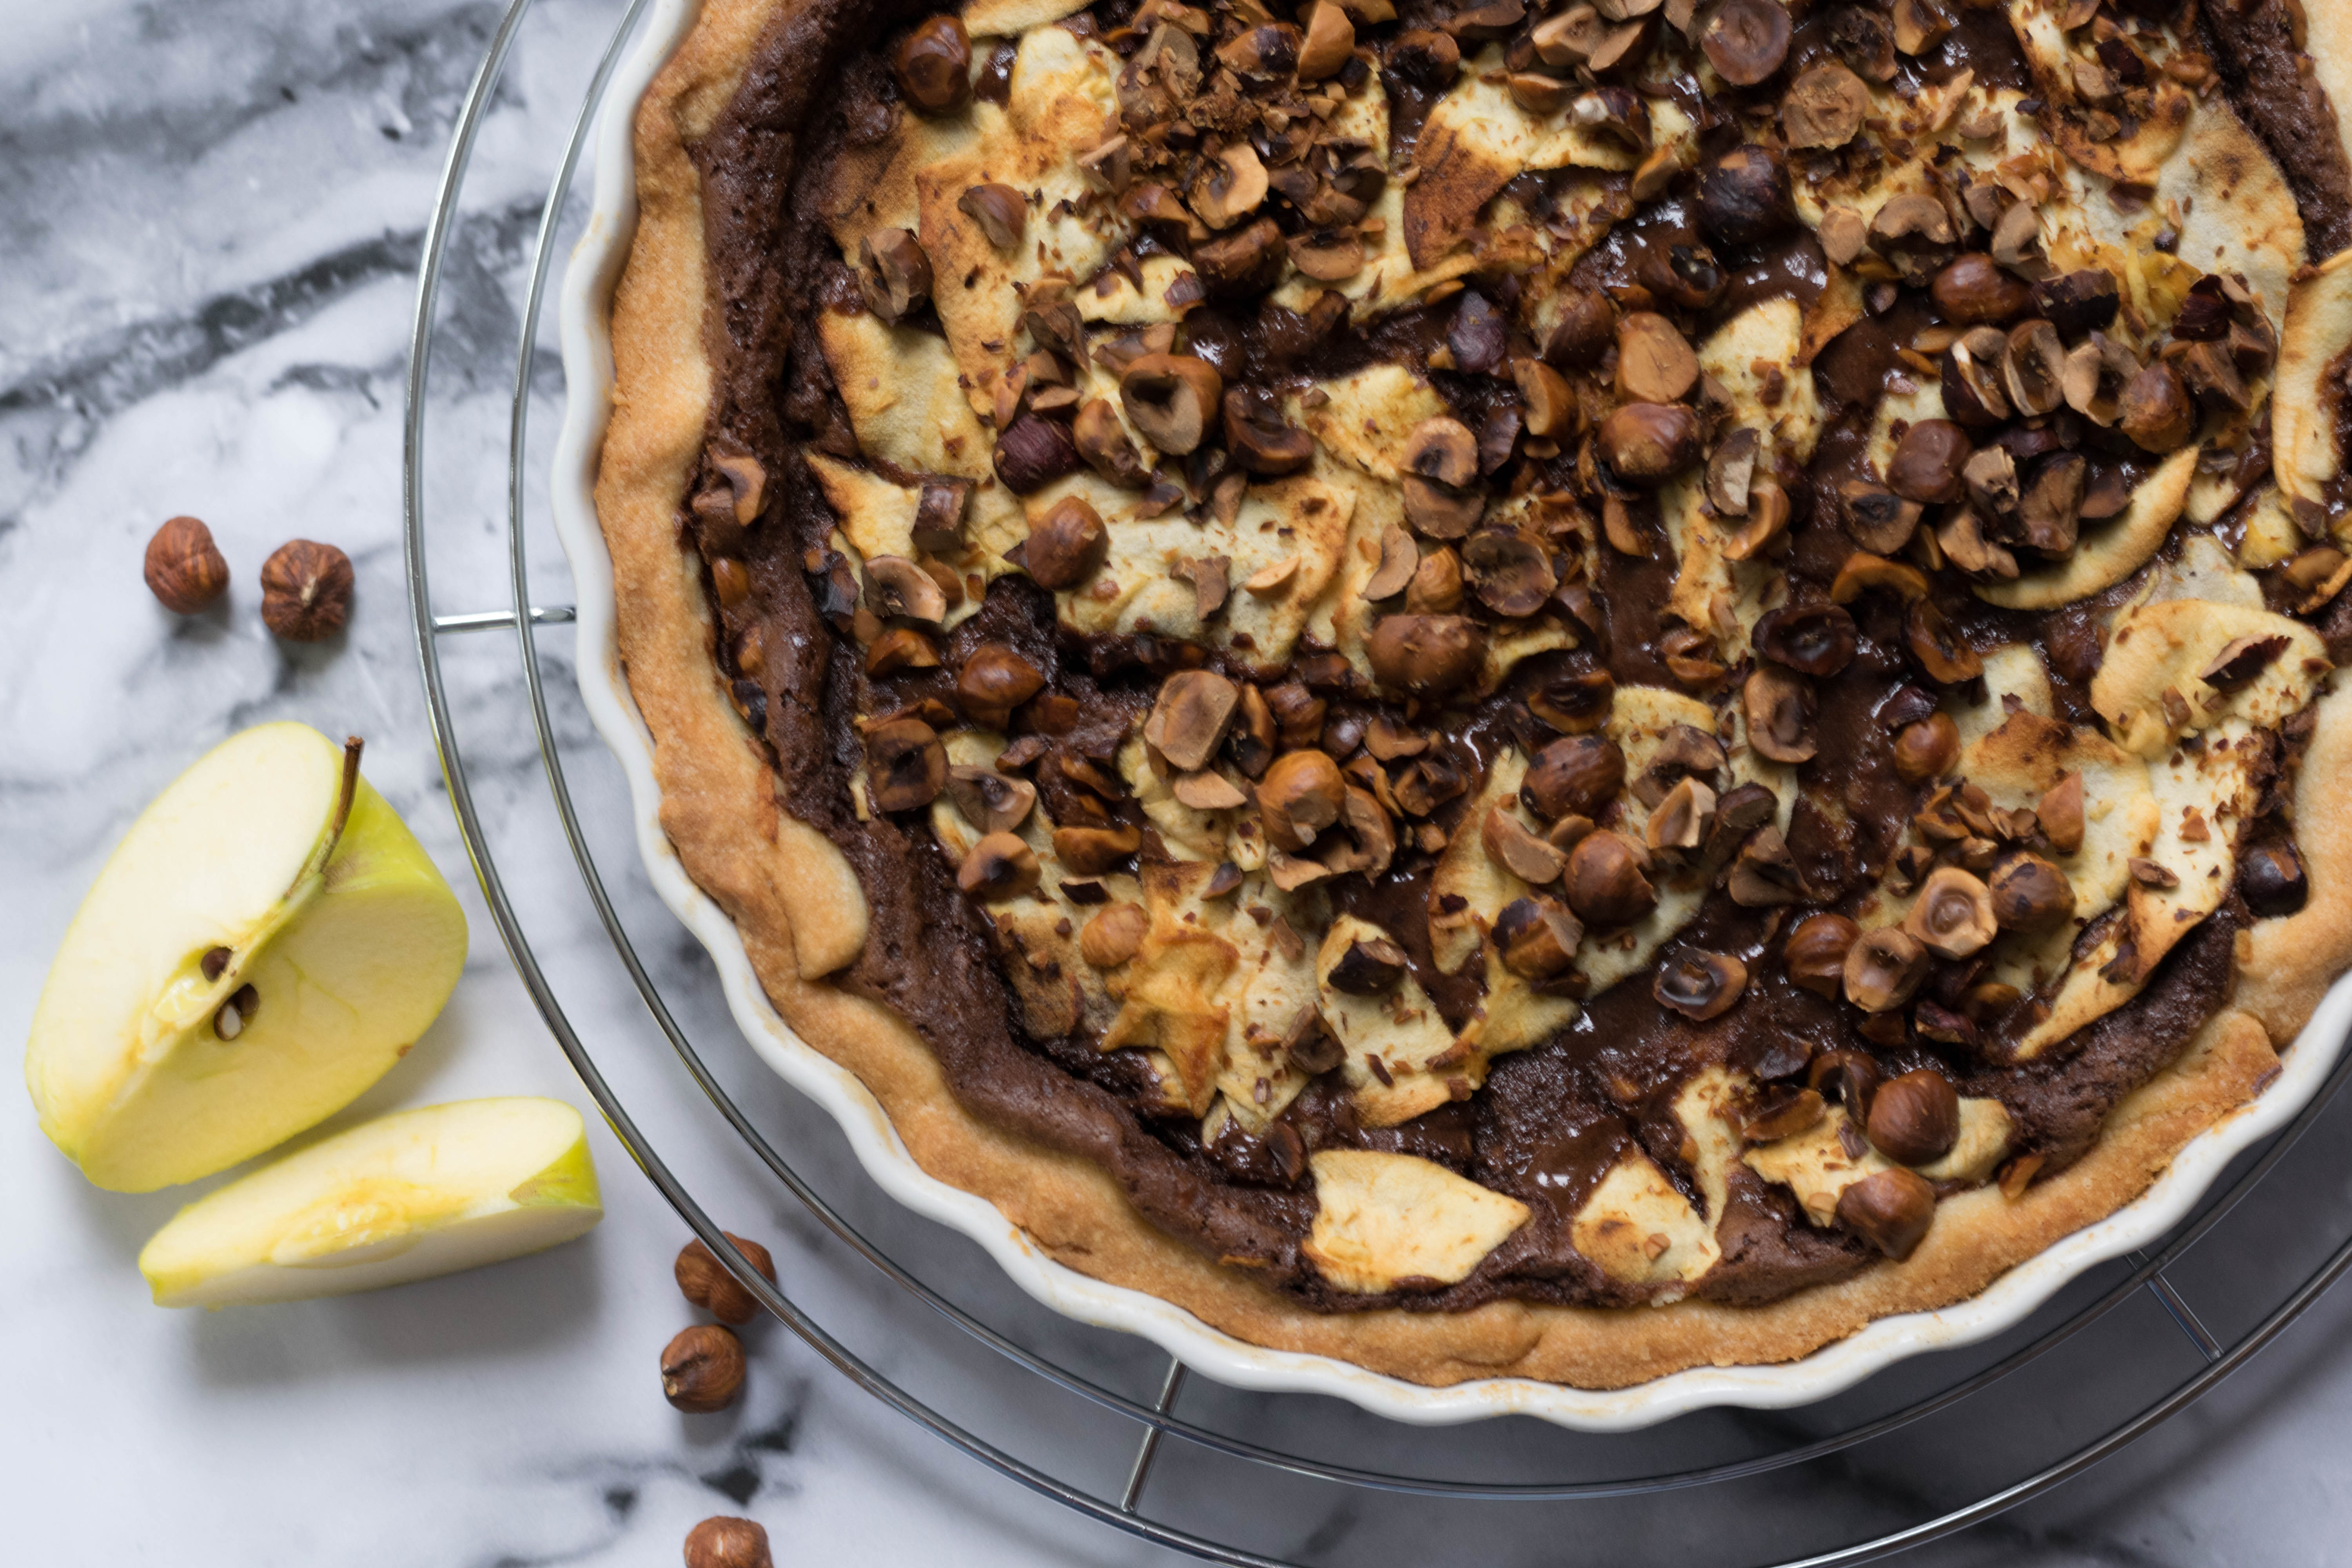 Running out of time – Apfel Nutella Tarte